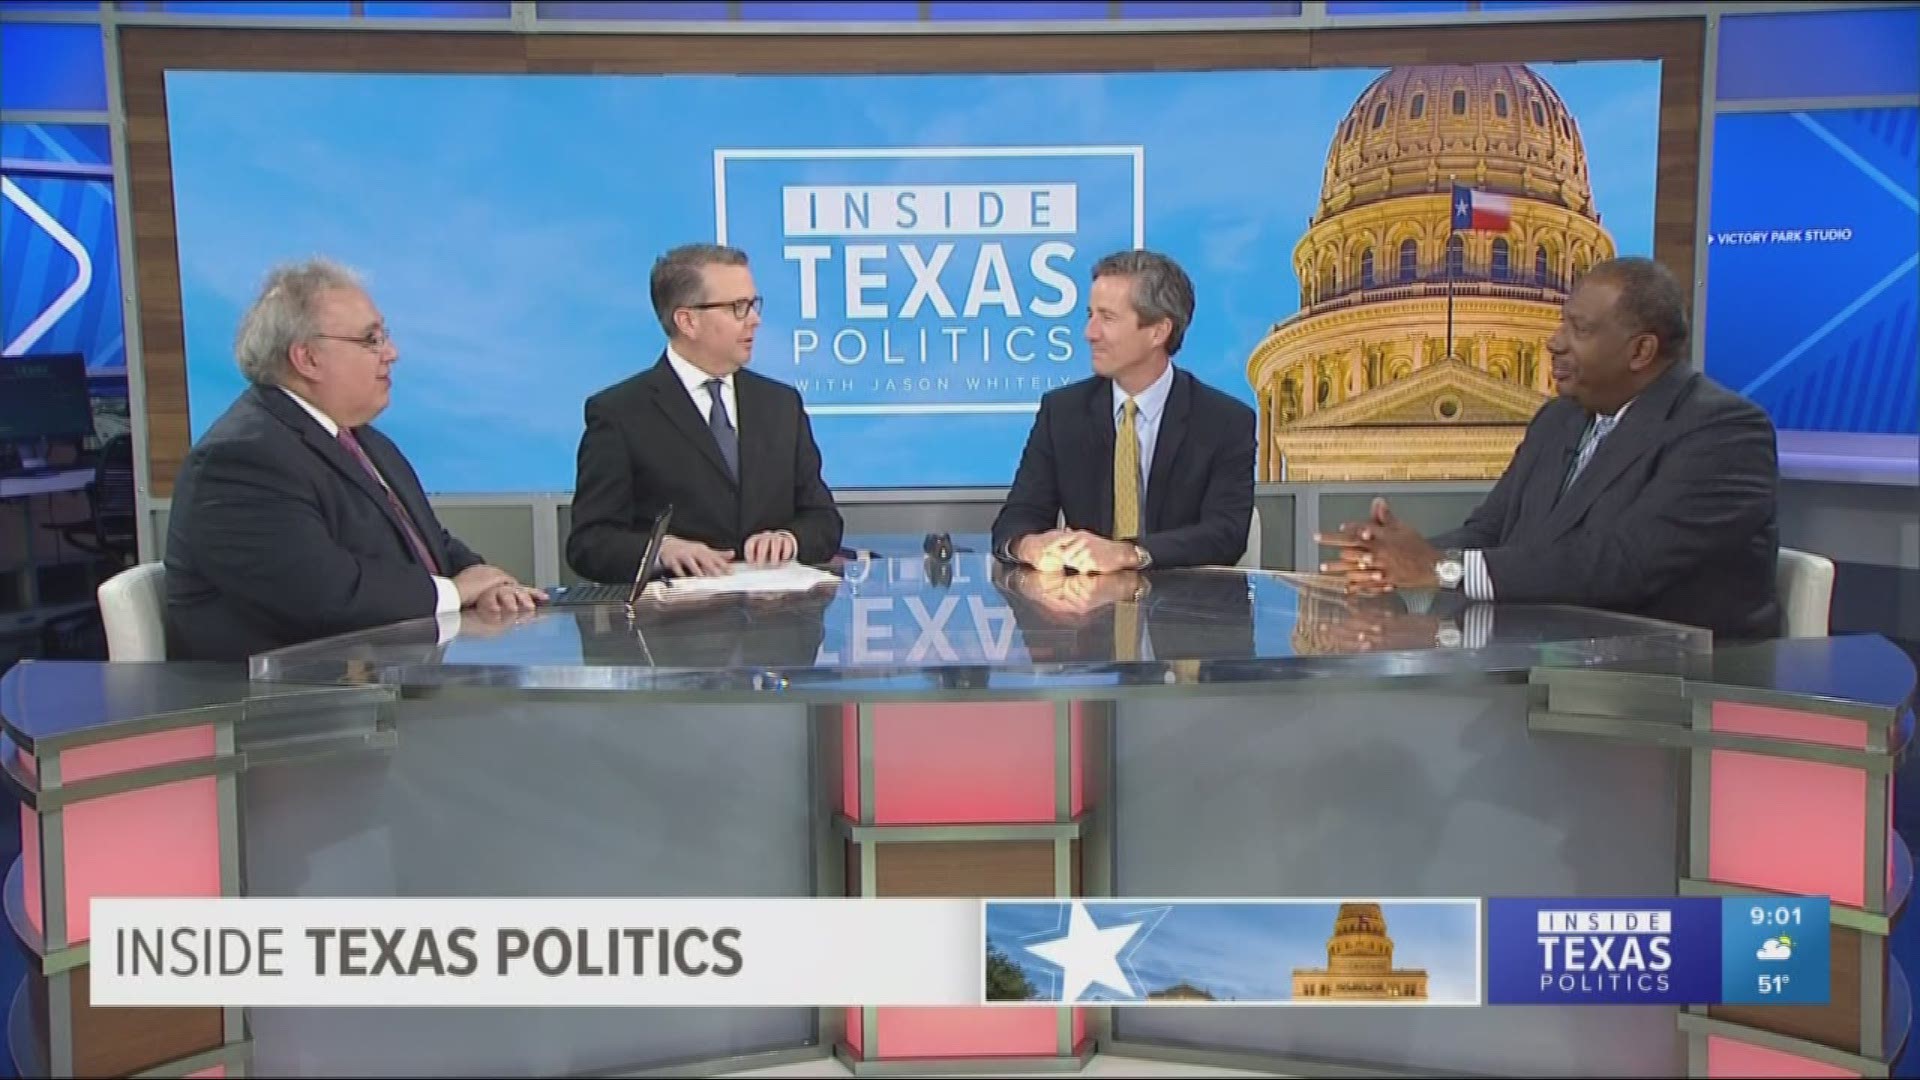 Two veteran state senators, Kelly Hancock, a Republican from North Richland Hills, and Royce West, a Dallas Democrat, are in studio to discuss what to expect in the 2019 session.